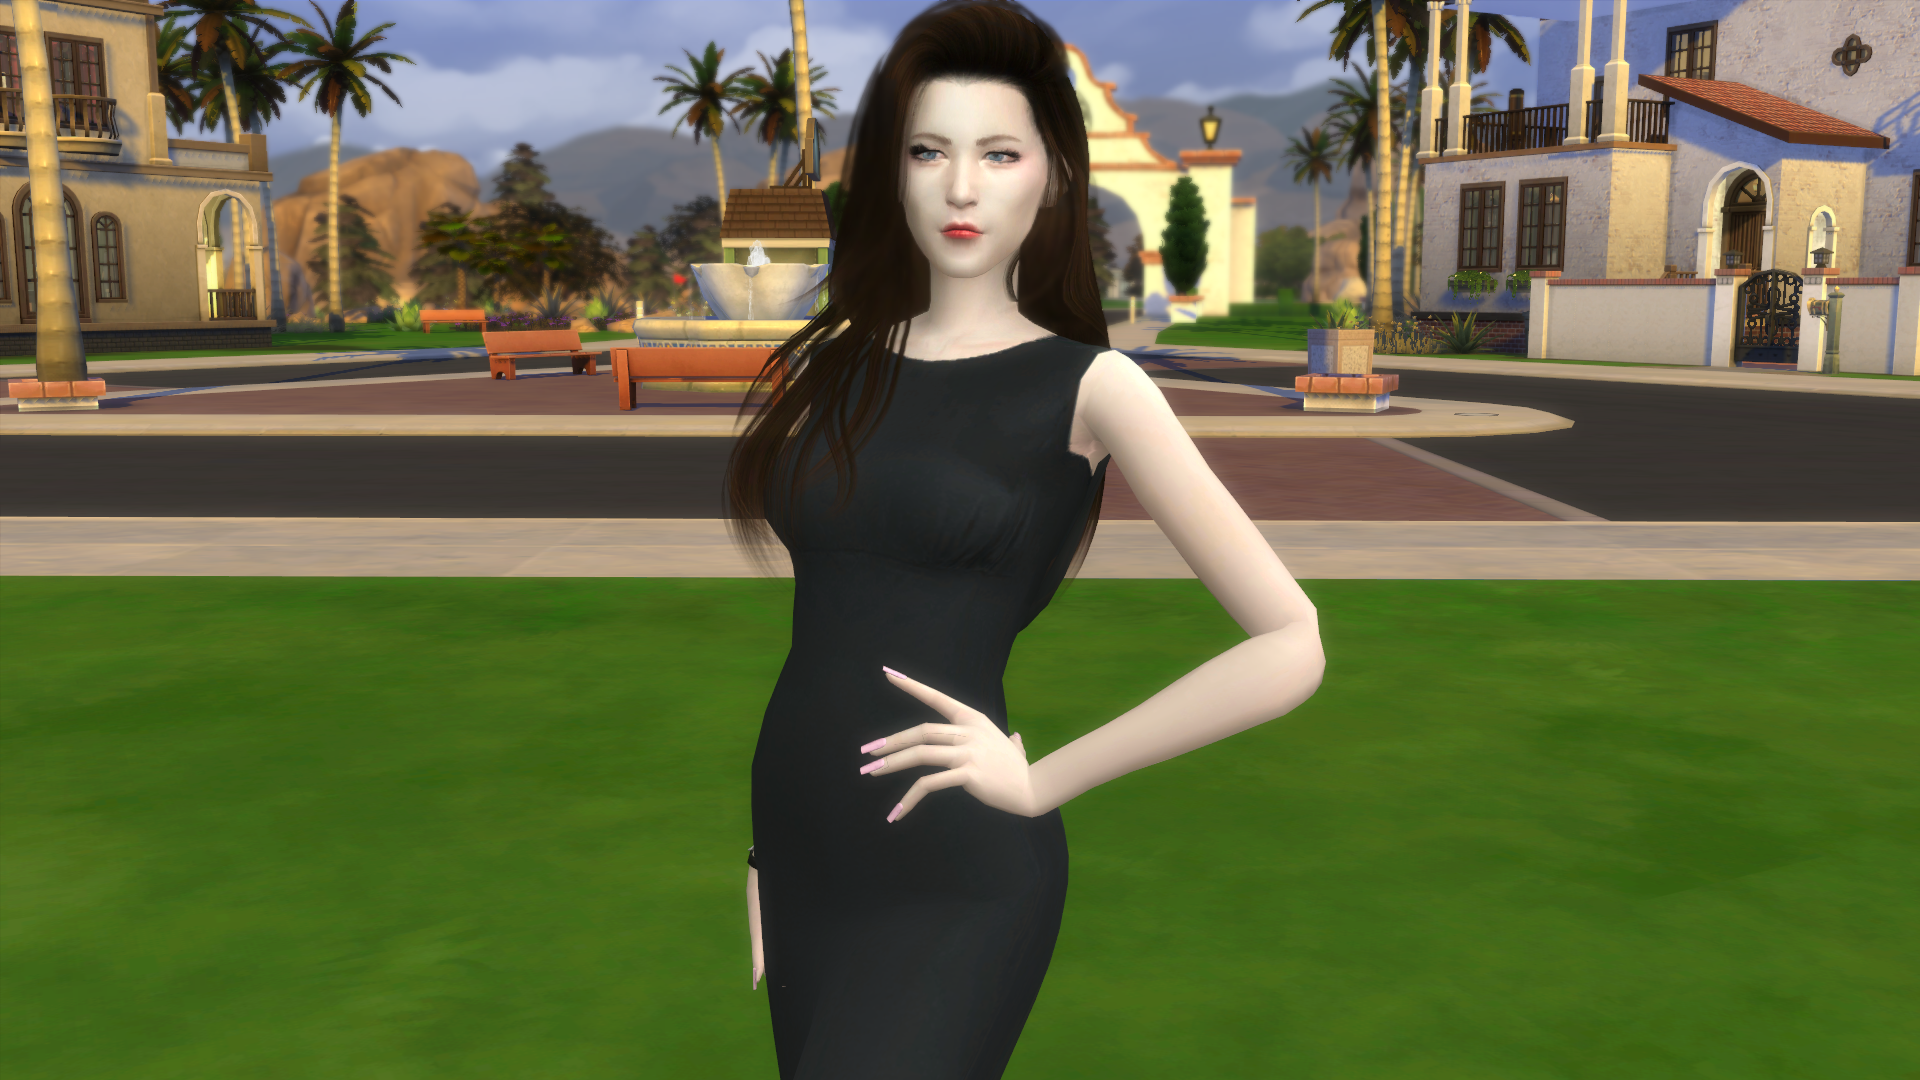 871779583_TheSims43_20_202110_32_12AM.png.6ac52180a0cc078aee324e96a107d9c1.png